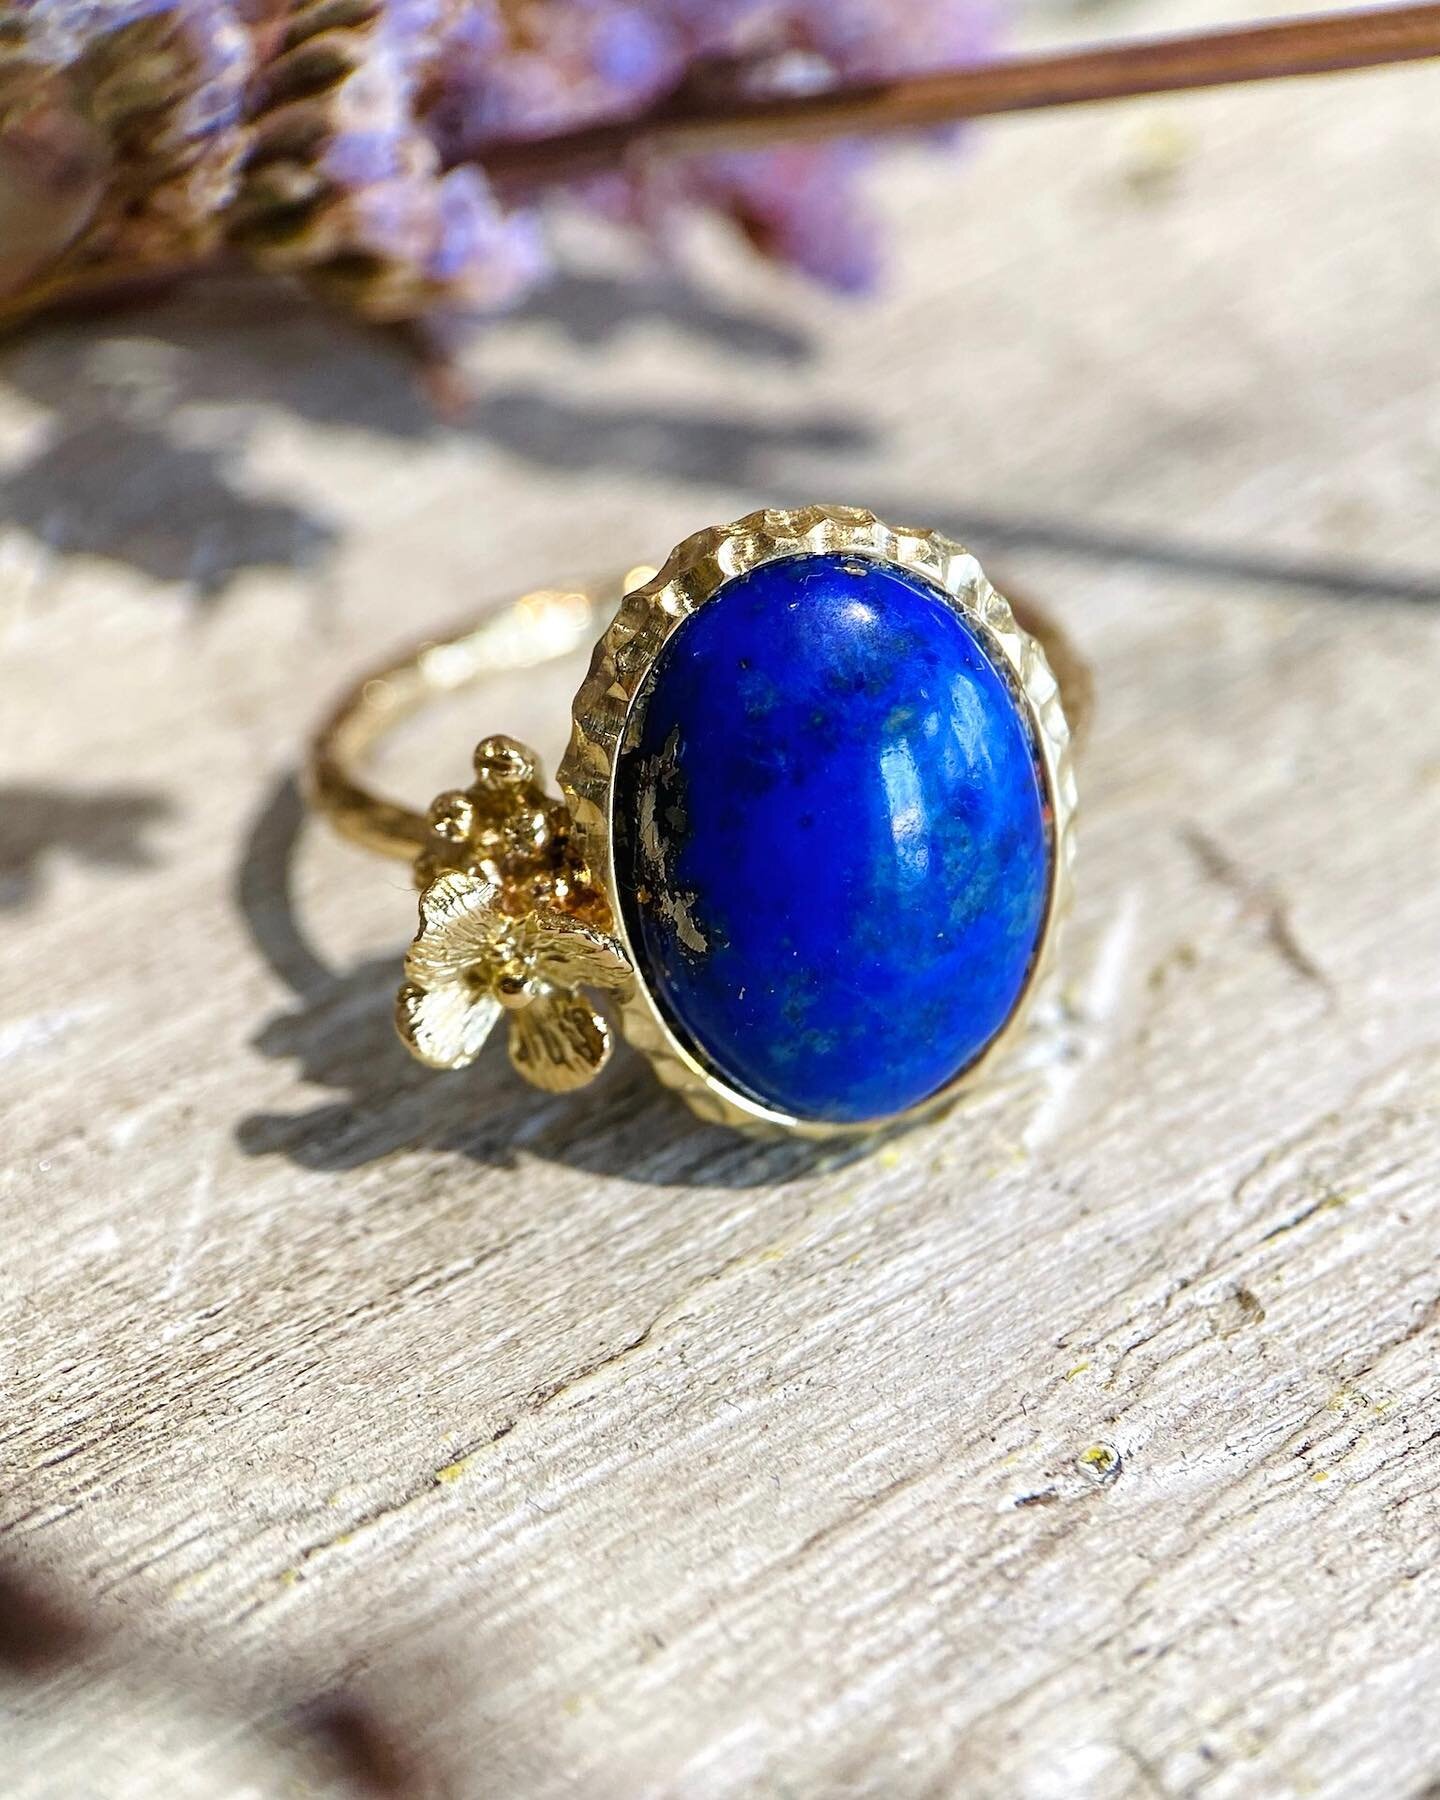 An 18K gold ring with a lapis lazuli transformed from a pendant 💙